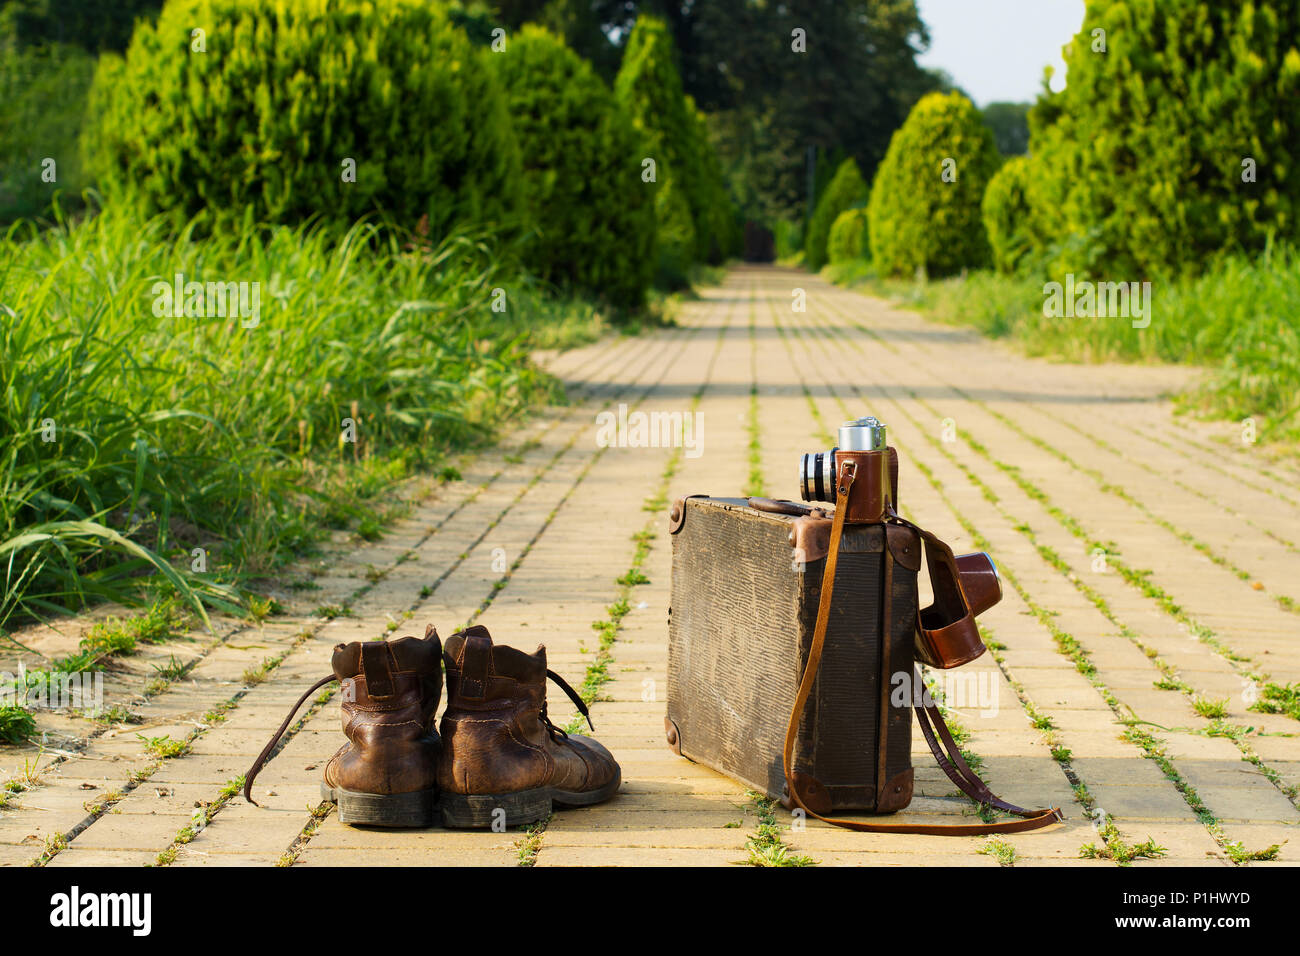 Traveling light! Shabby ankle boots next to a vintage cardboard suitcase, a film camera in its open leather case, and a yellow brick road. Stock Photo